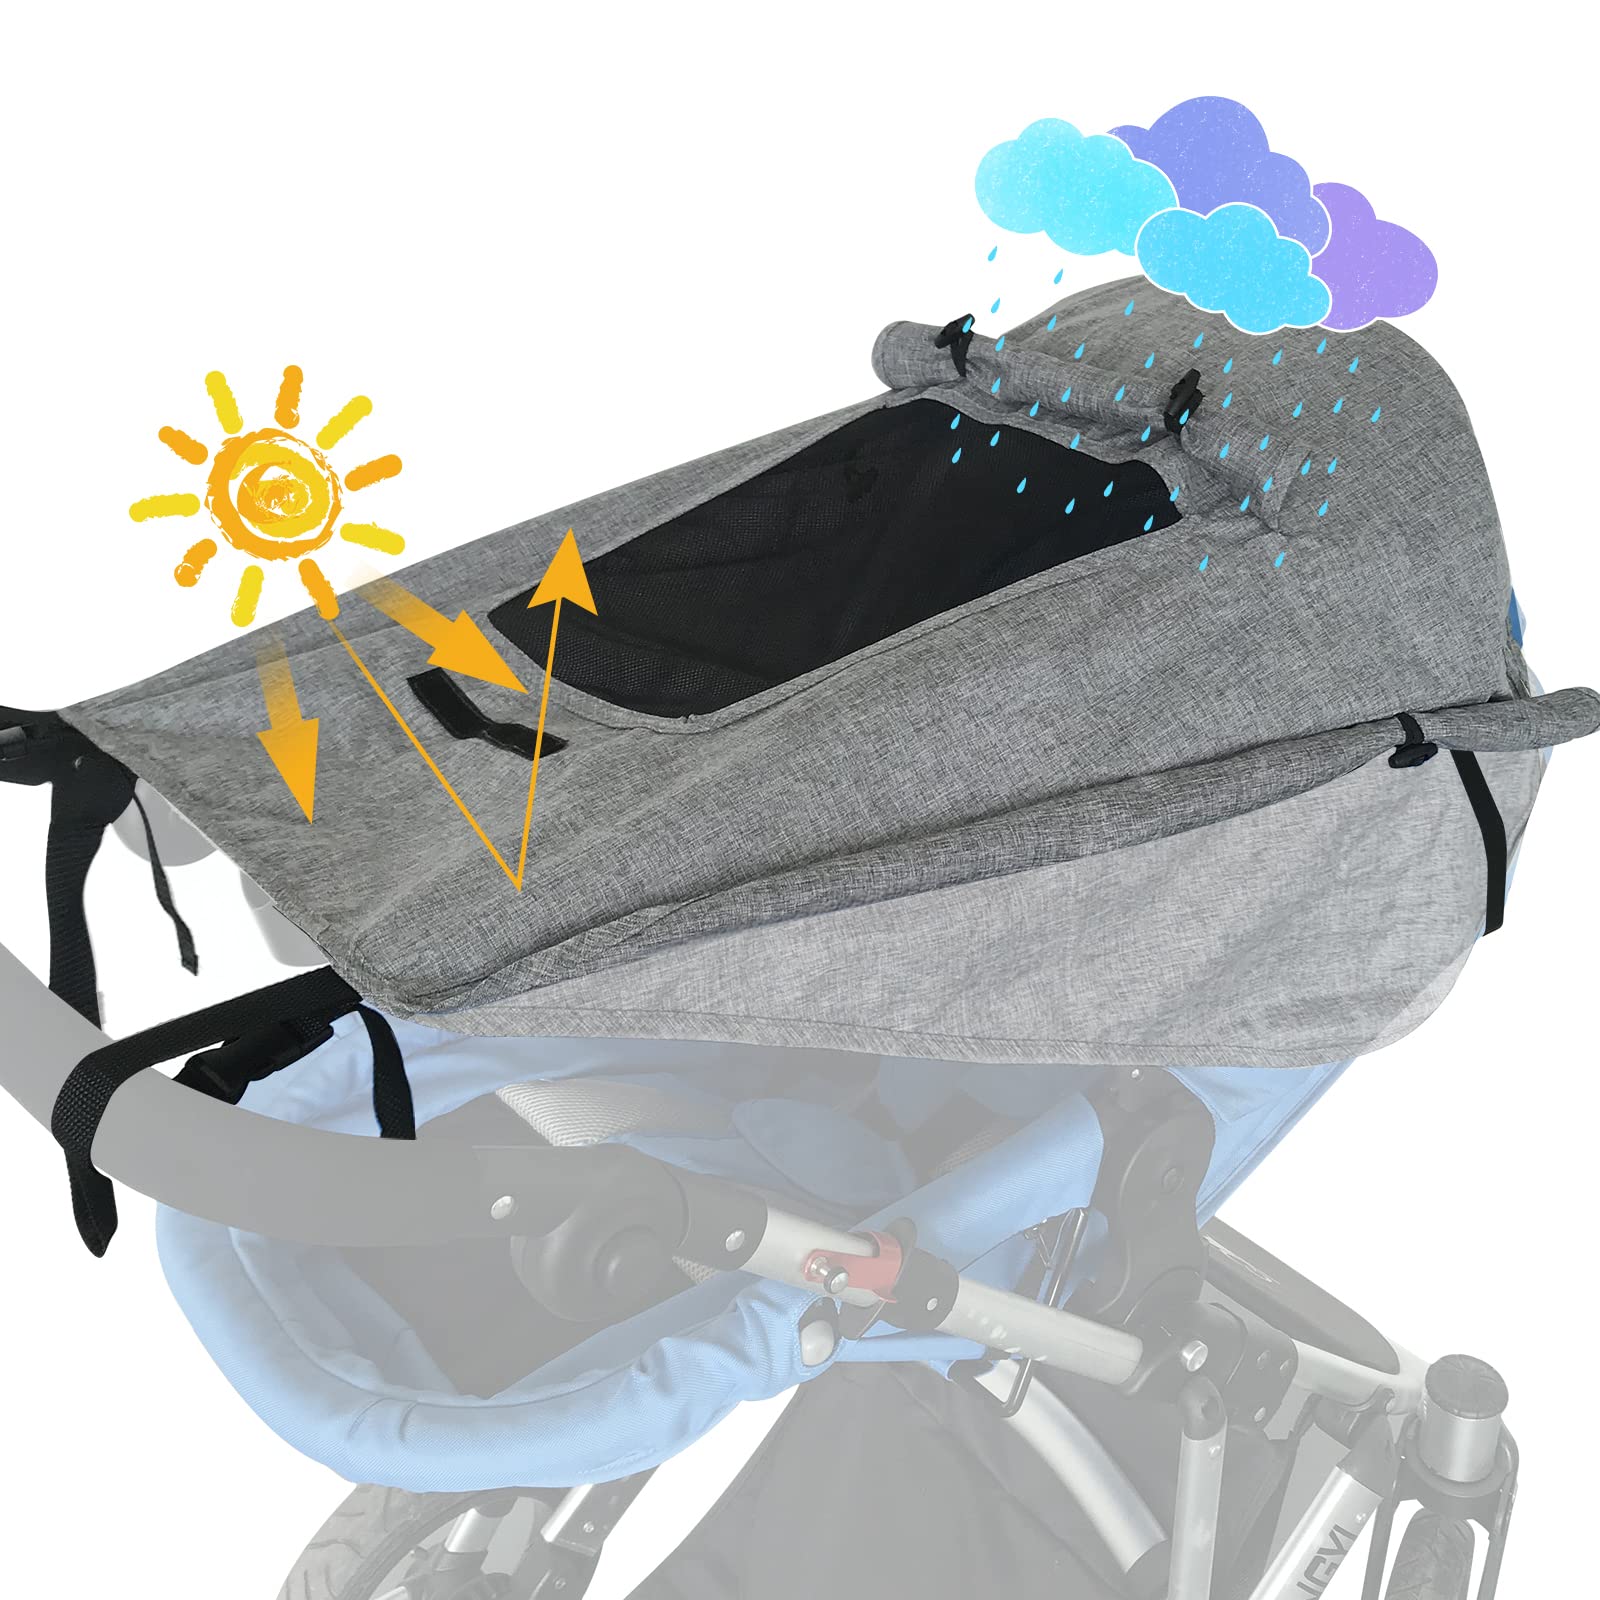 WD&CD Buggy Sun Shade Universal Pram Sunshade Sun Cover for Strollers Pushchairs UV Protection Water Resistant Easy to Install (Grey)